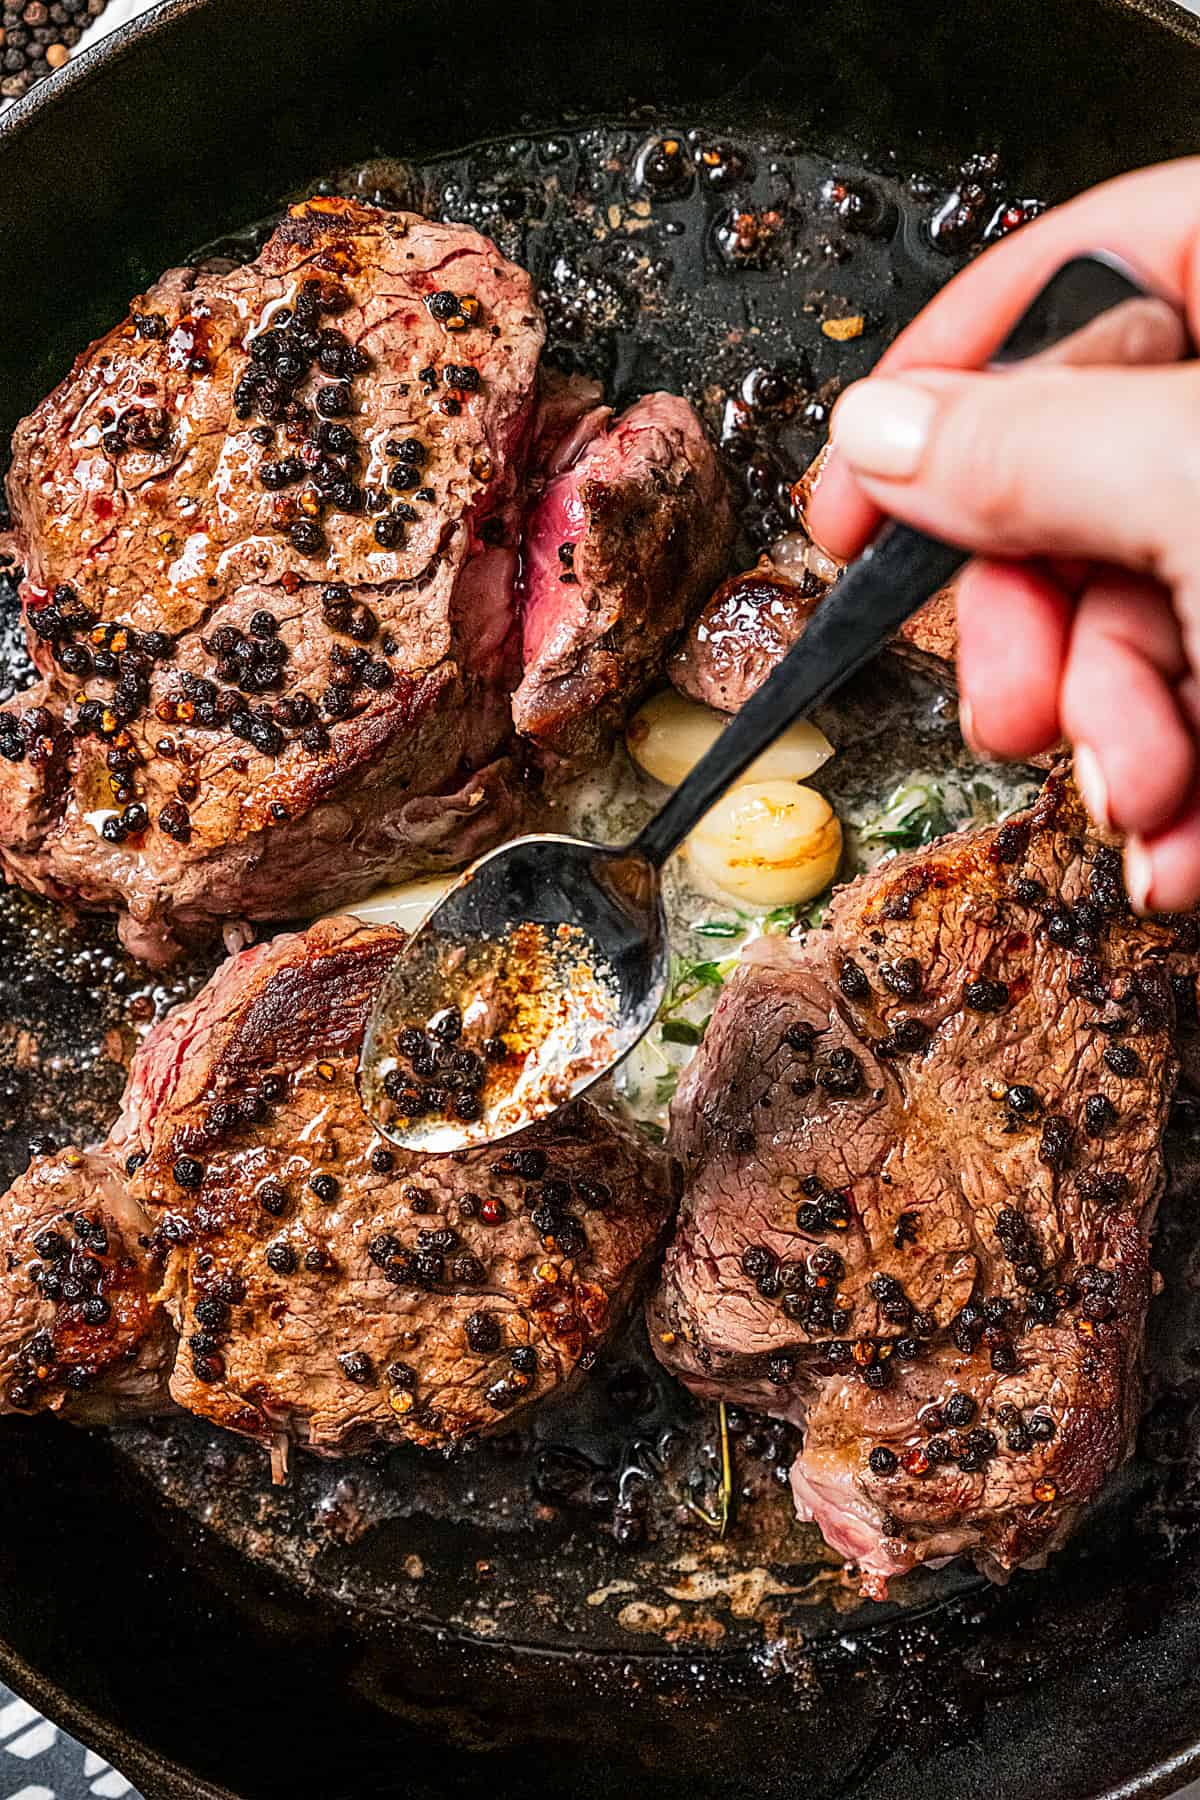 A hand uses a spoon to drizzle seasoned butter over peppercorn-crusted steaks as they cook in a cast iron skillet.